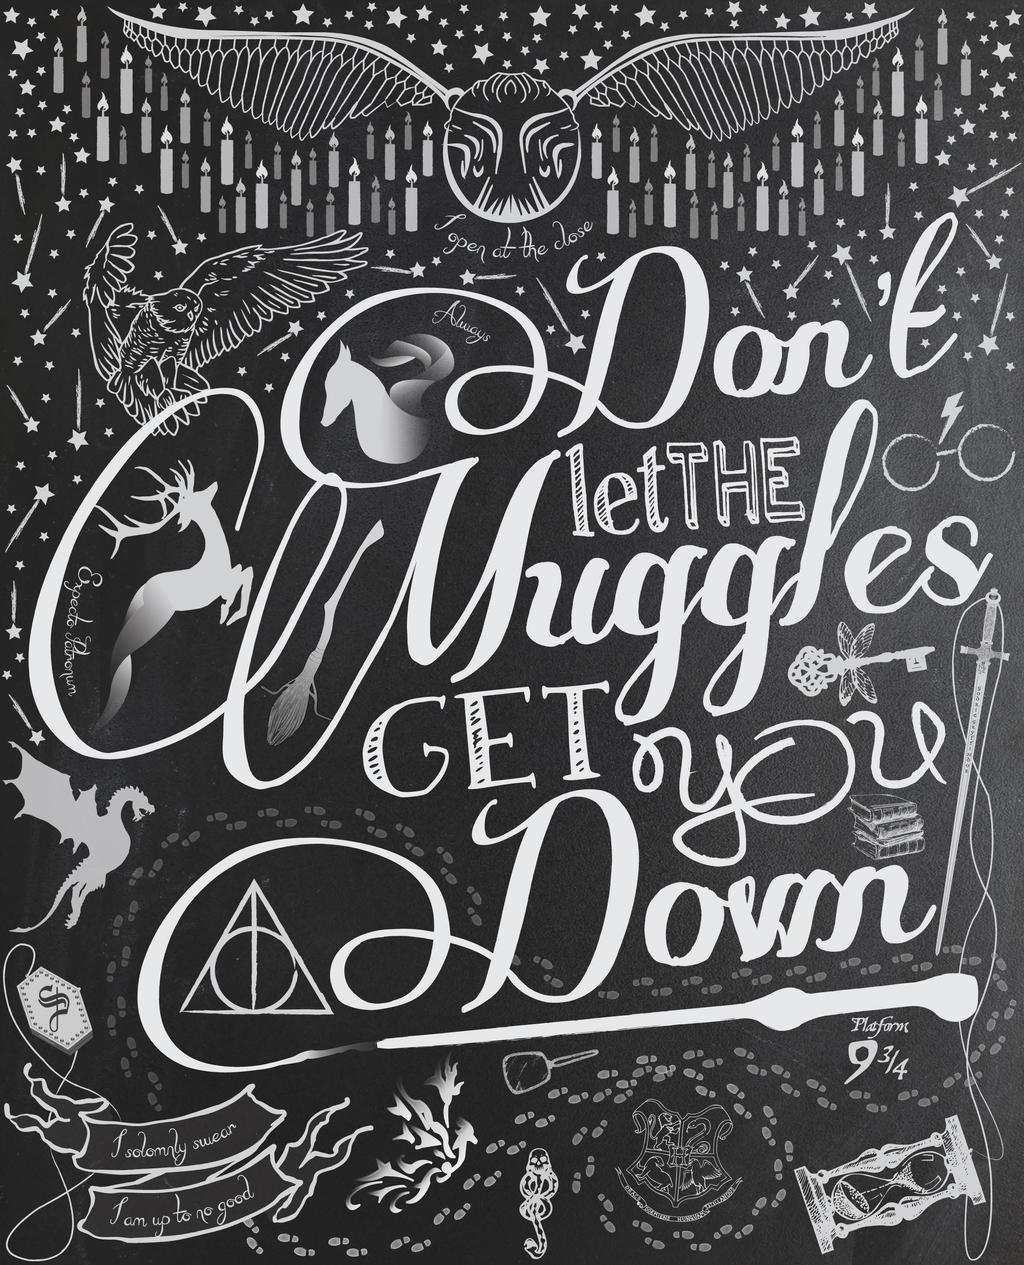 Don't let the Muggles get you down.